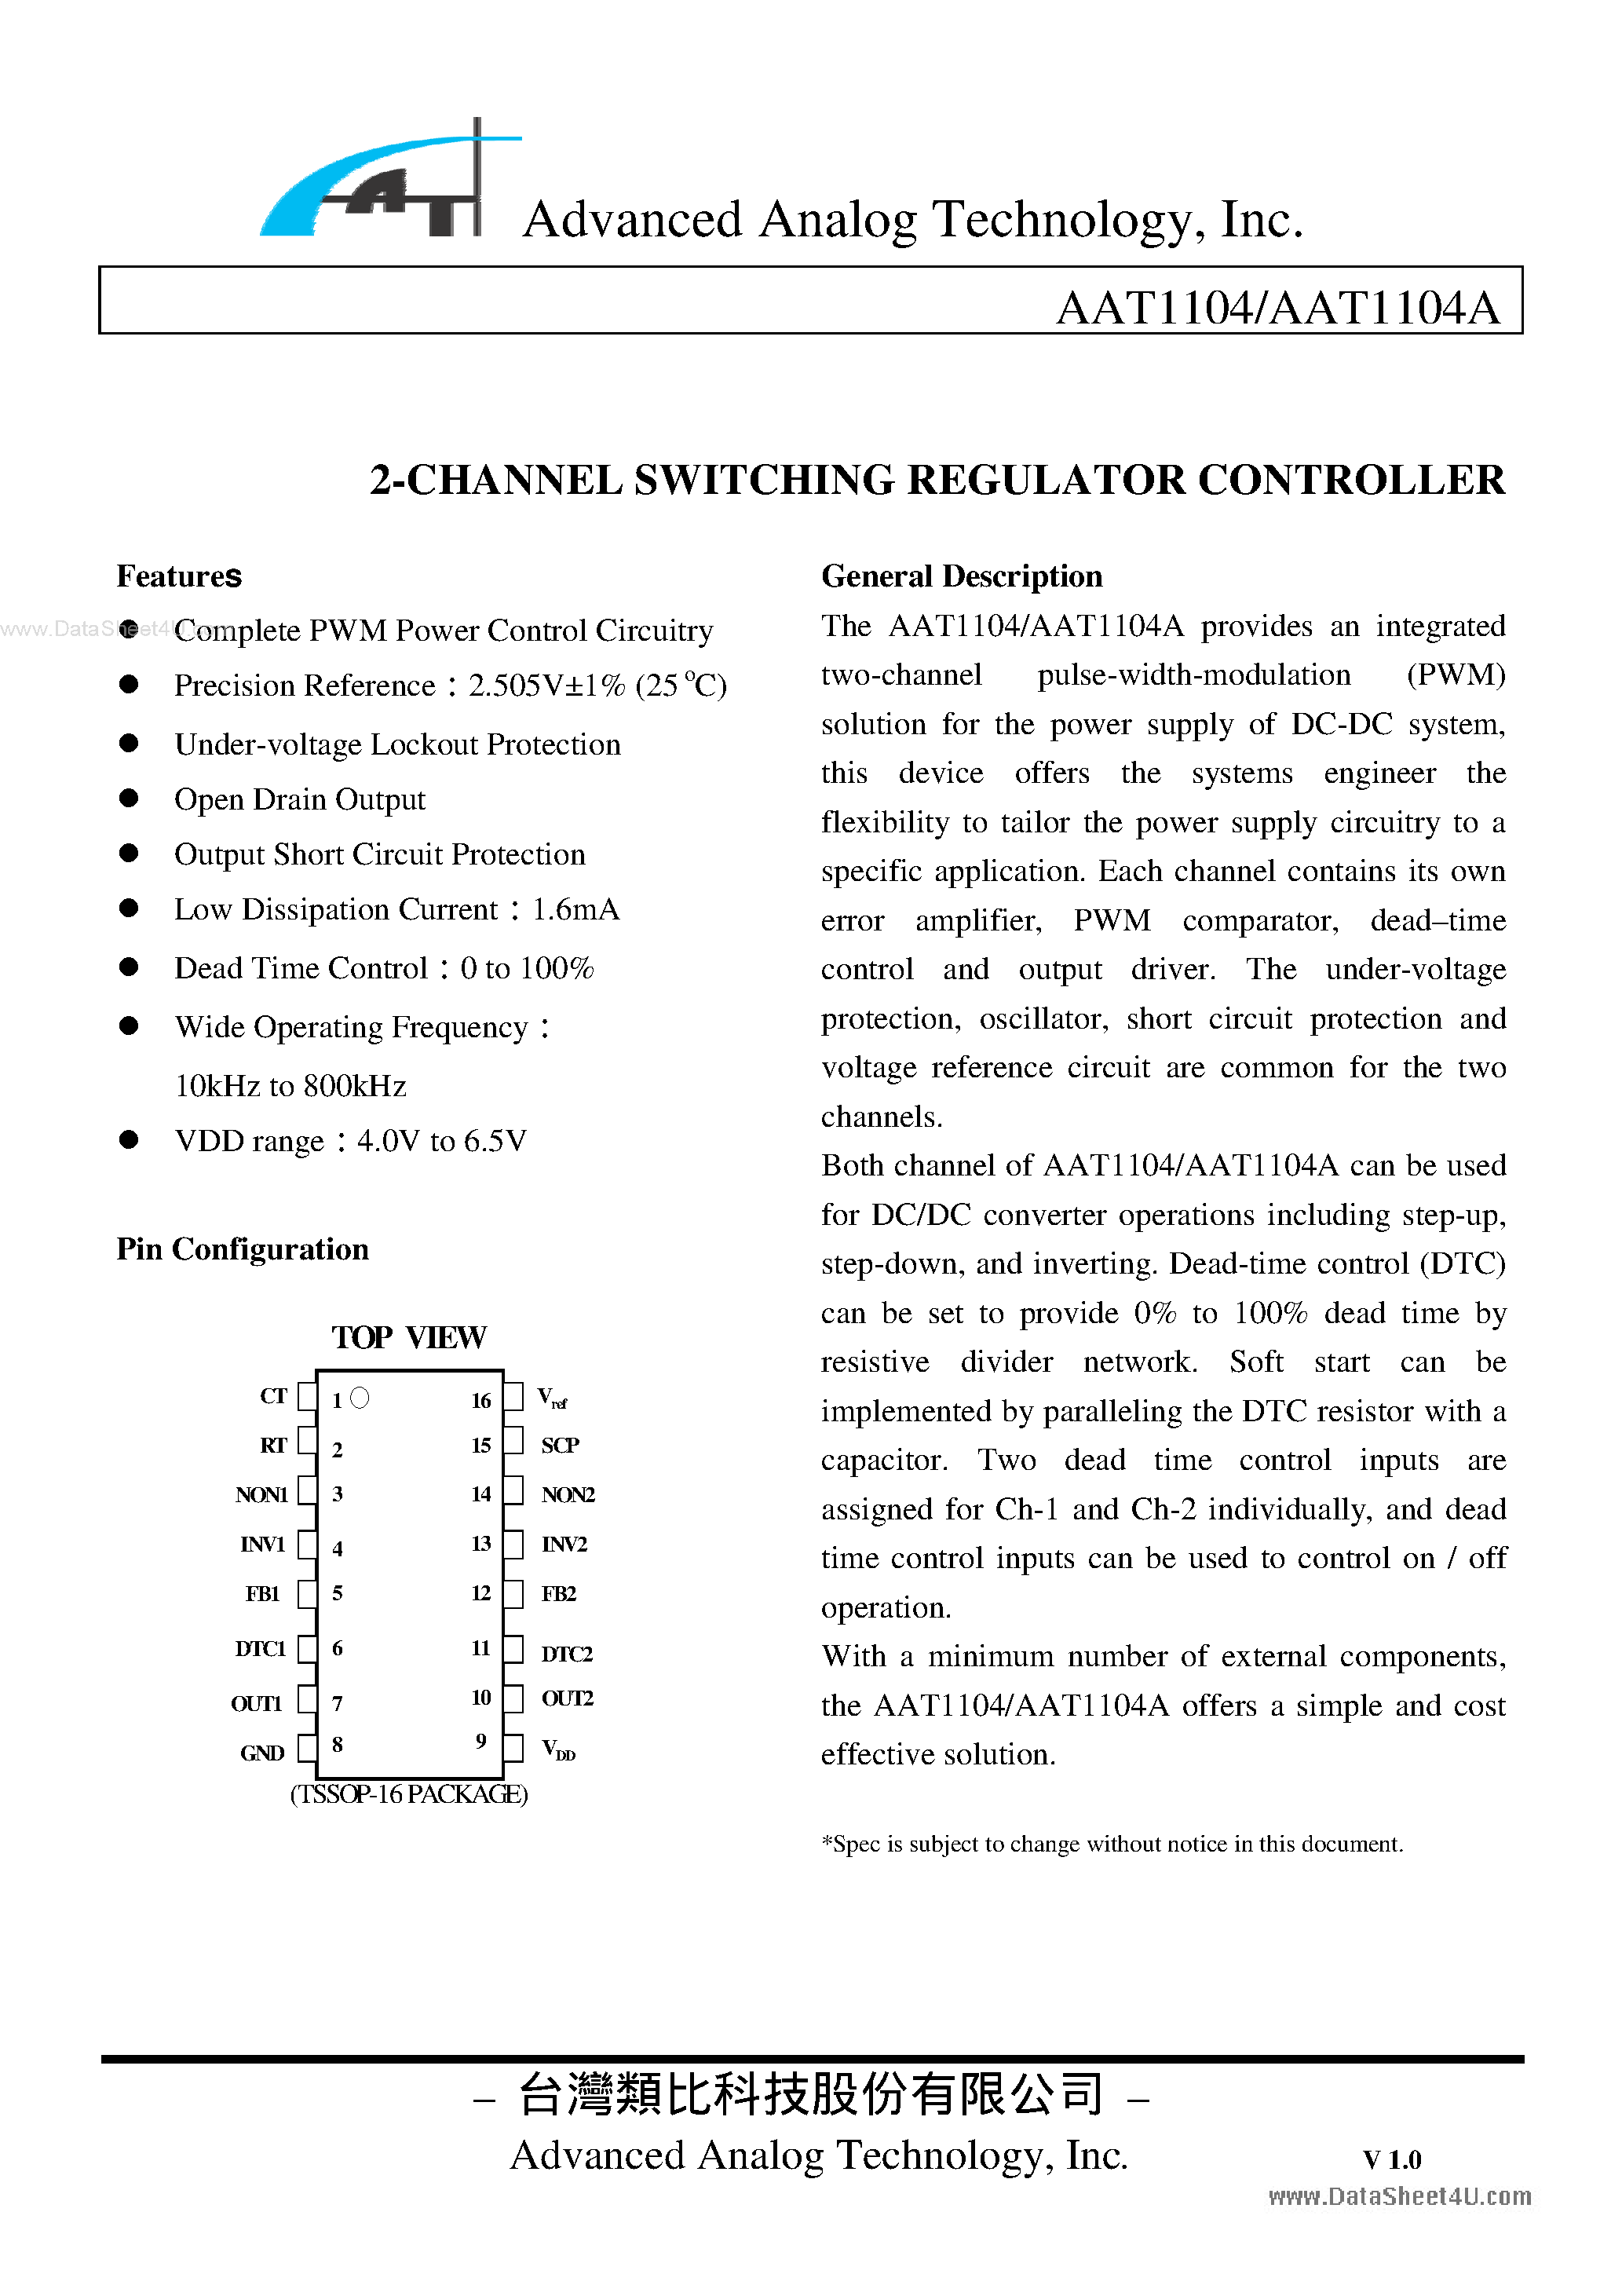 Datasheet AAT1104 - 2-CHANNEL SWITCHING REGULATOR CONTROLLER page 1